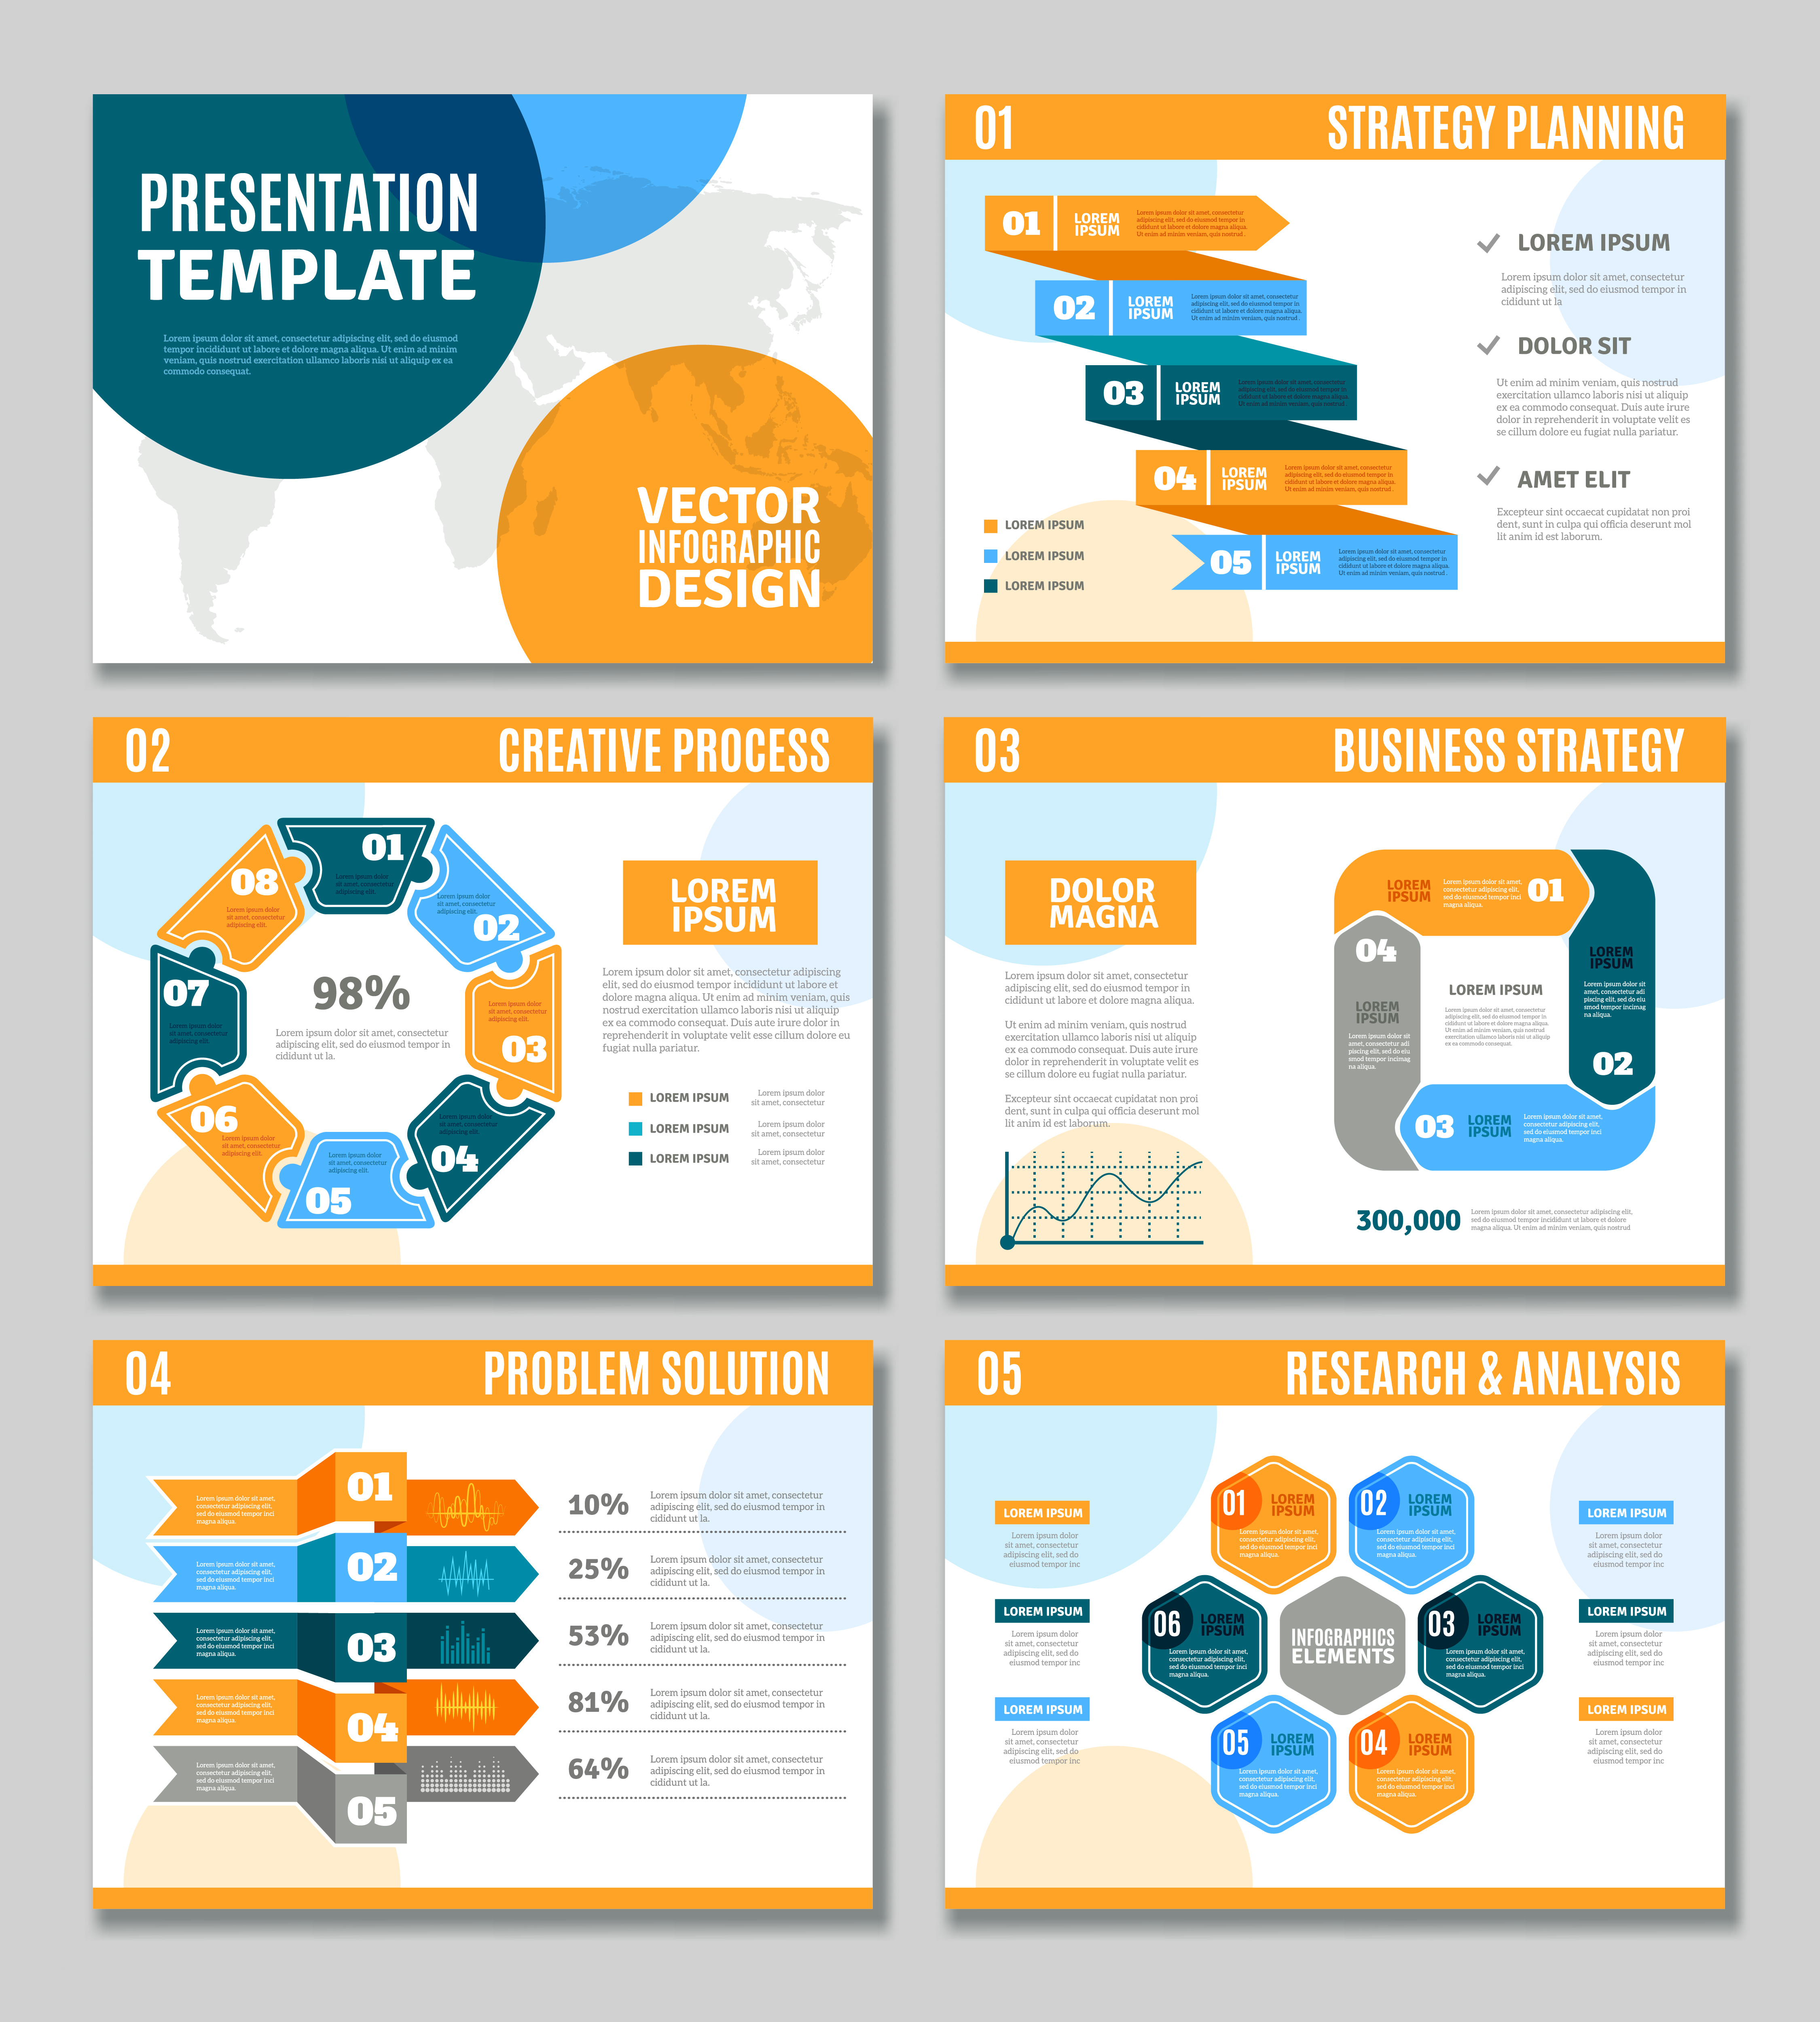 what are presentation graphics used for